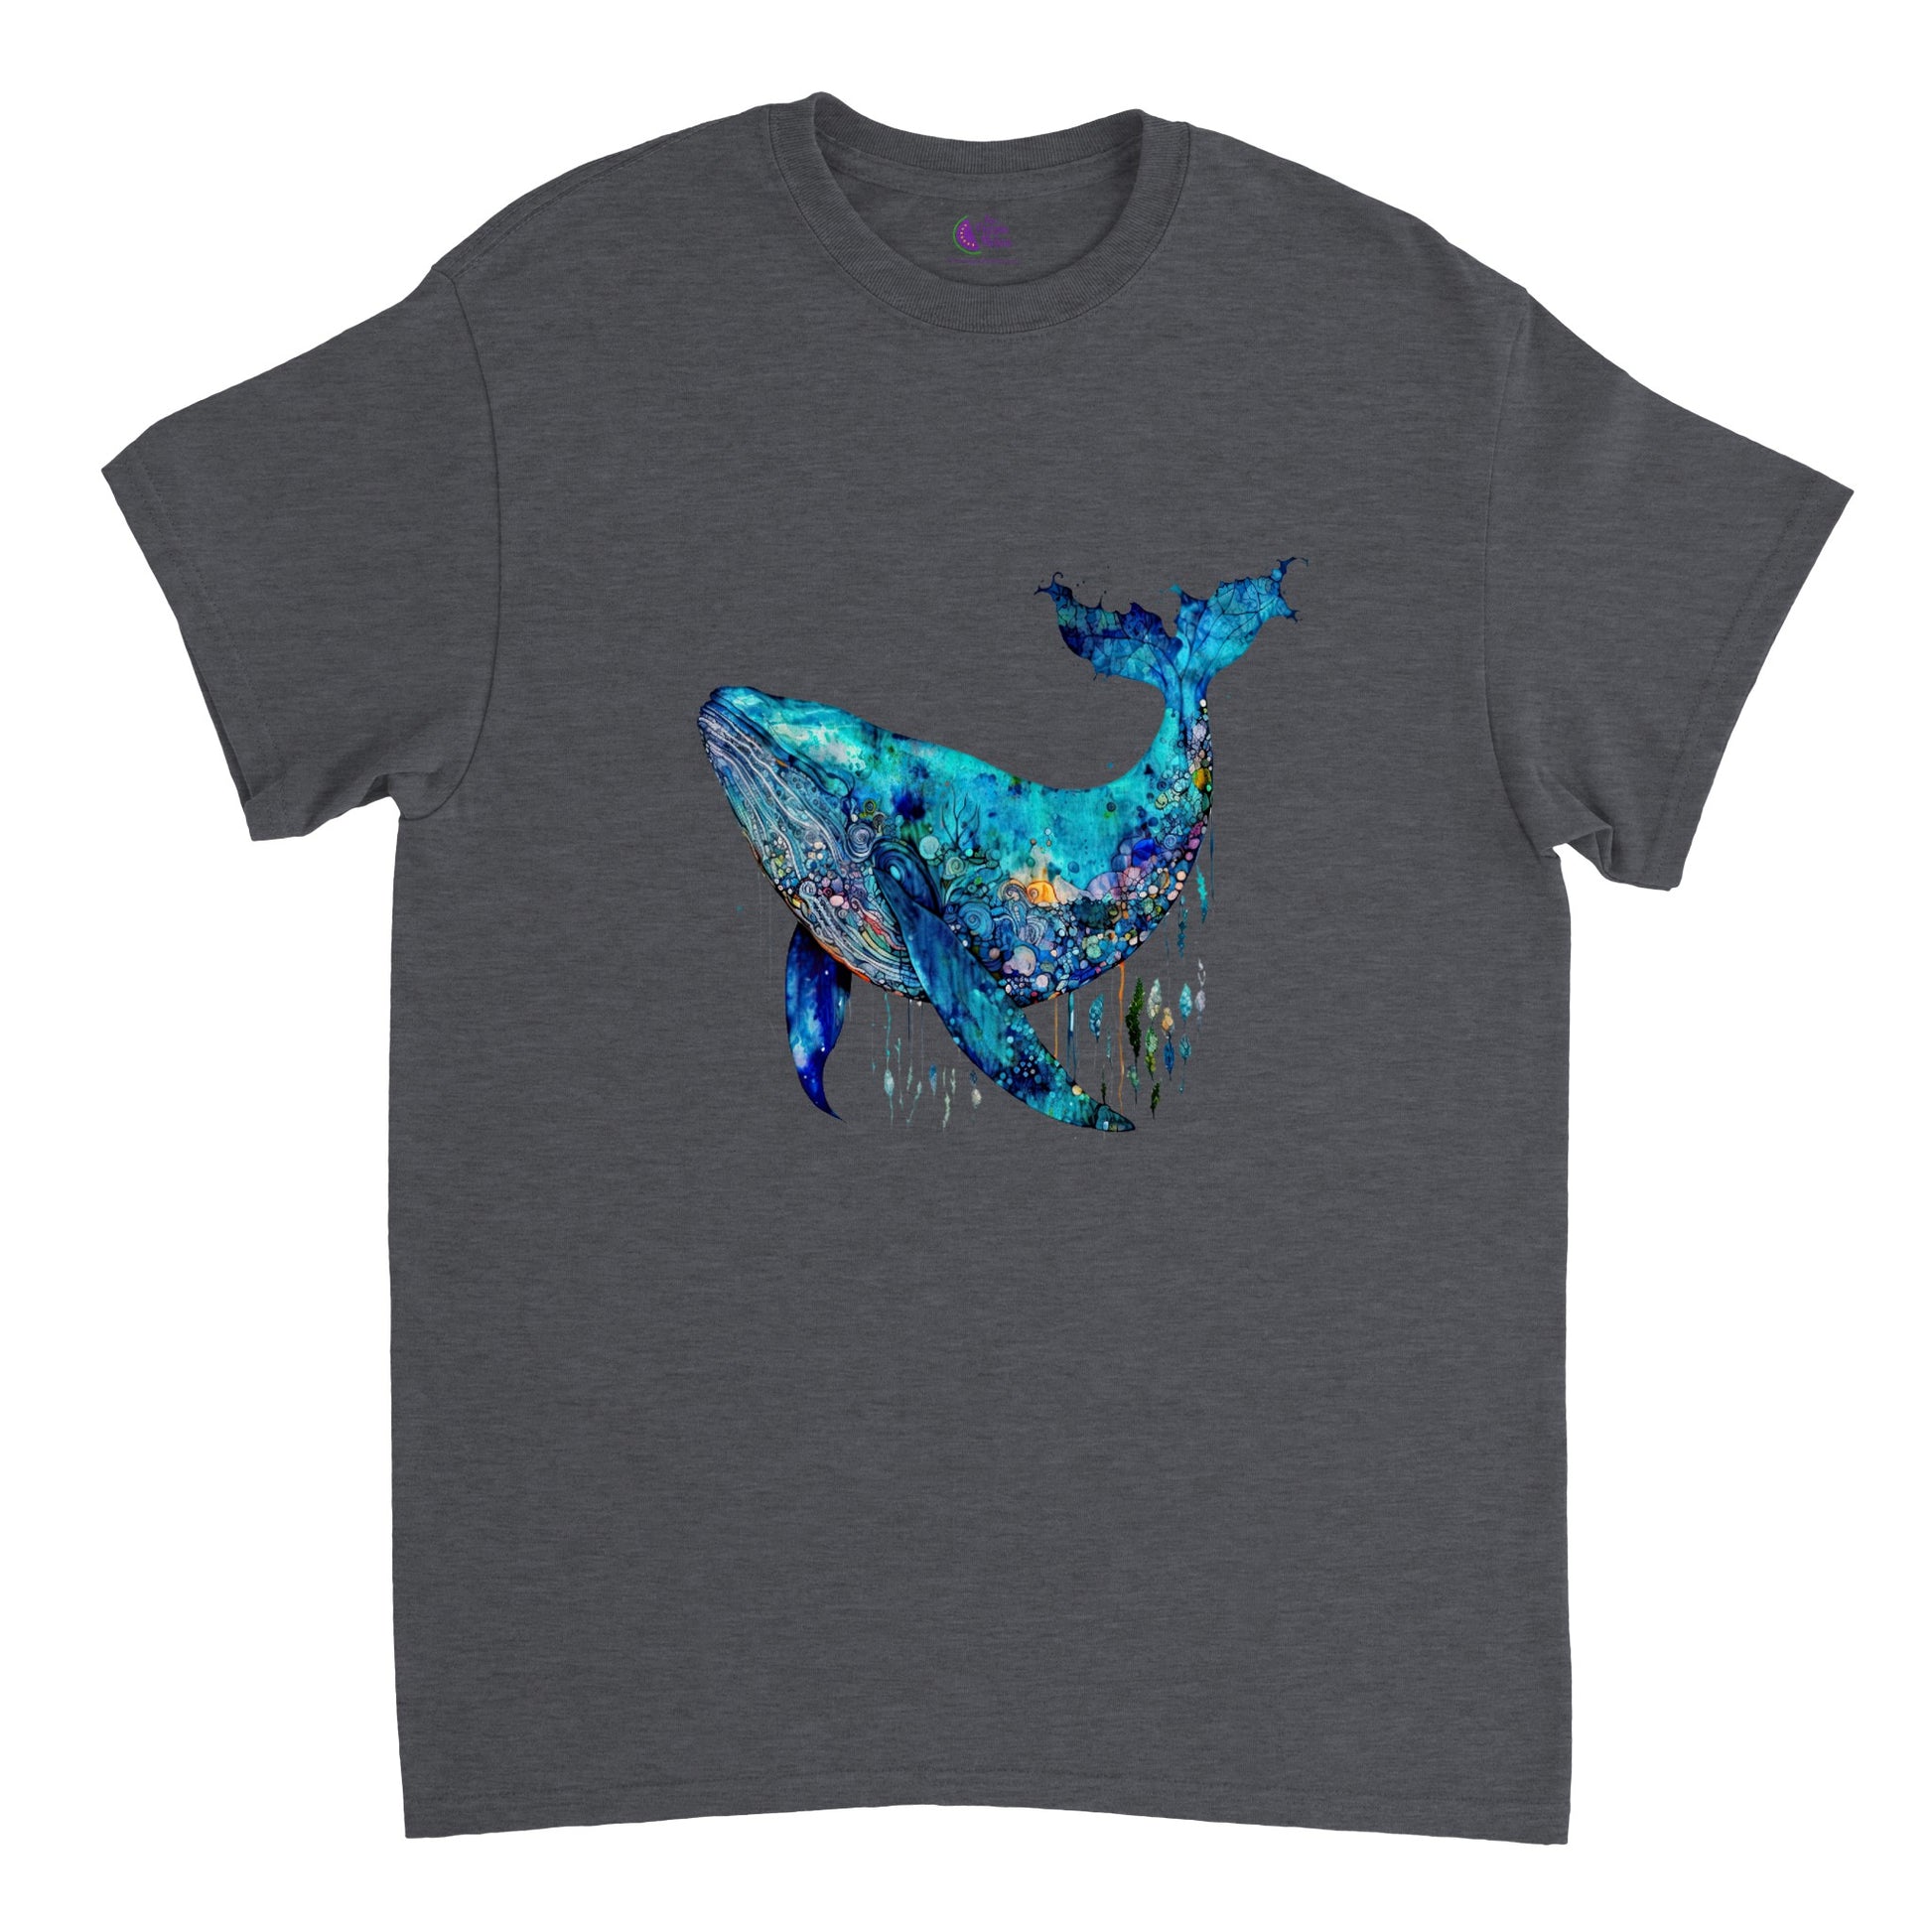 Grey t-shirt with a blue whale print